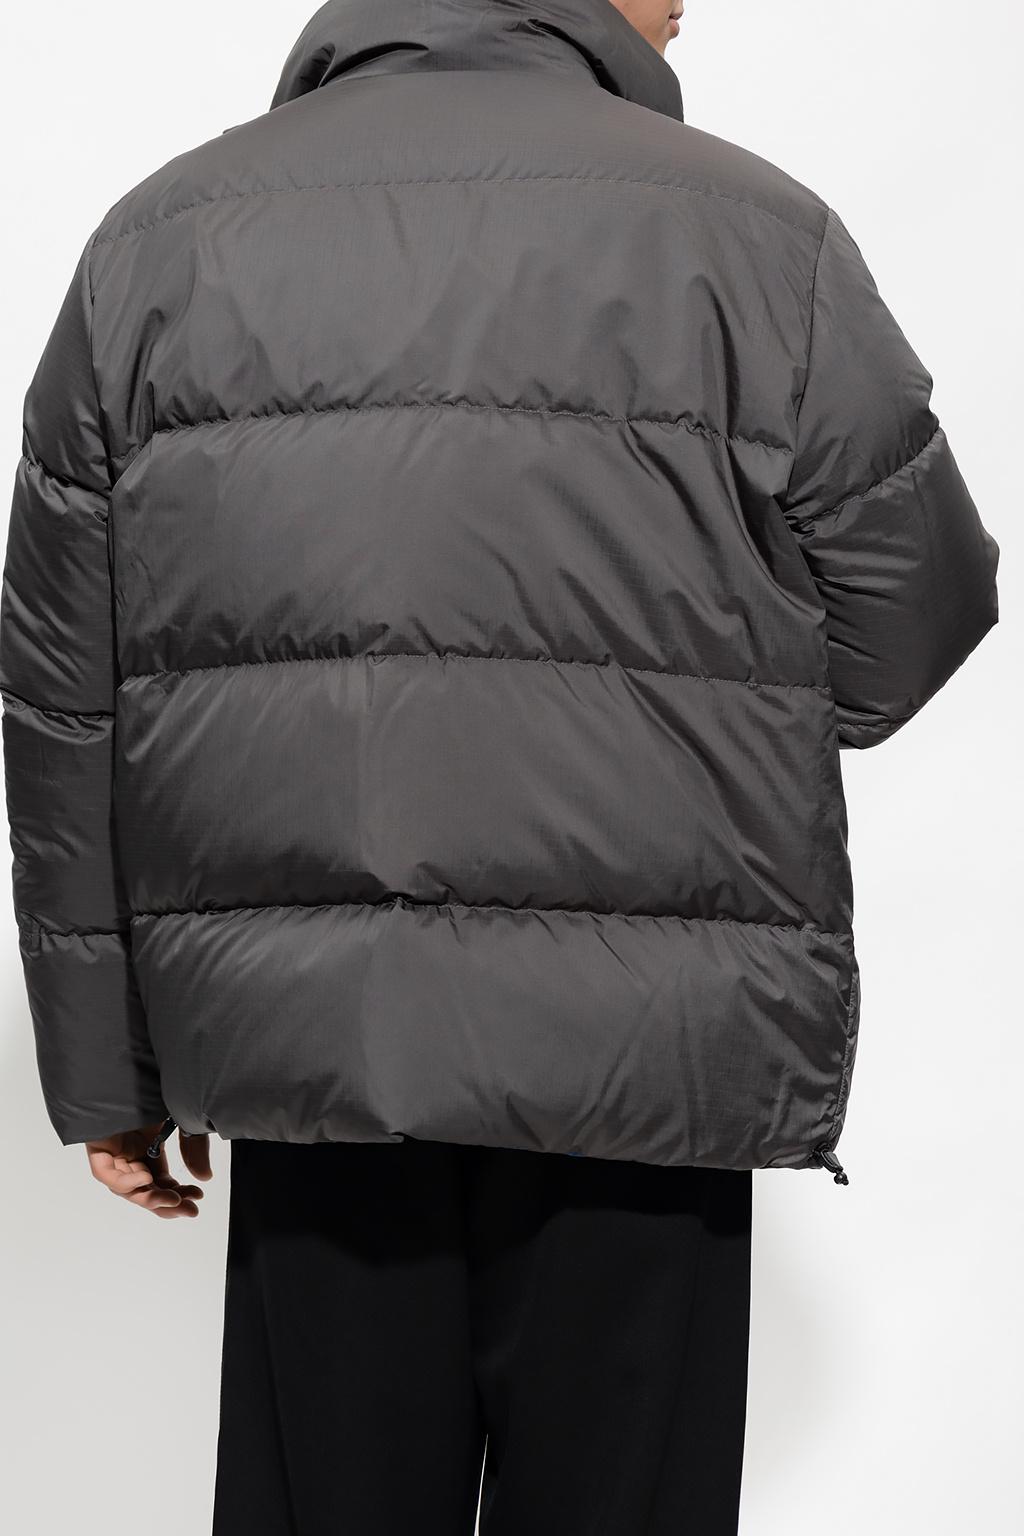 burberry Leather 'Digby’ reversible down jacket